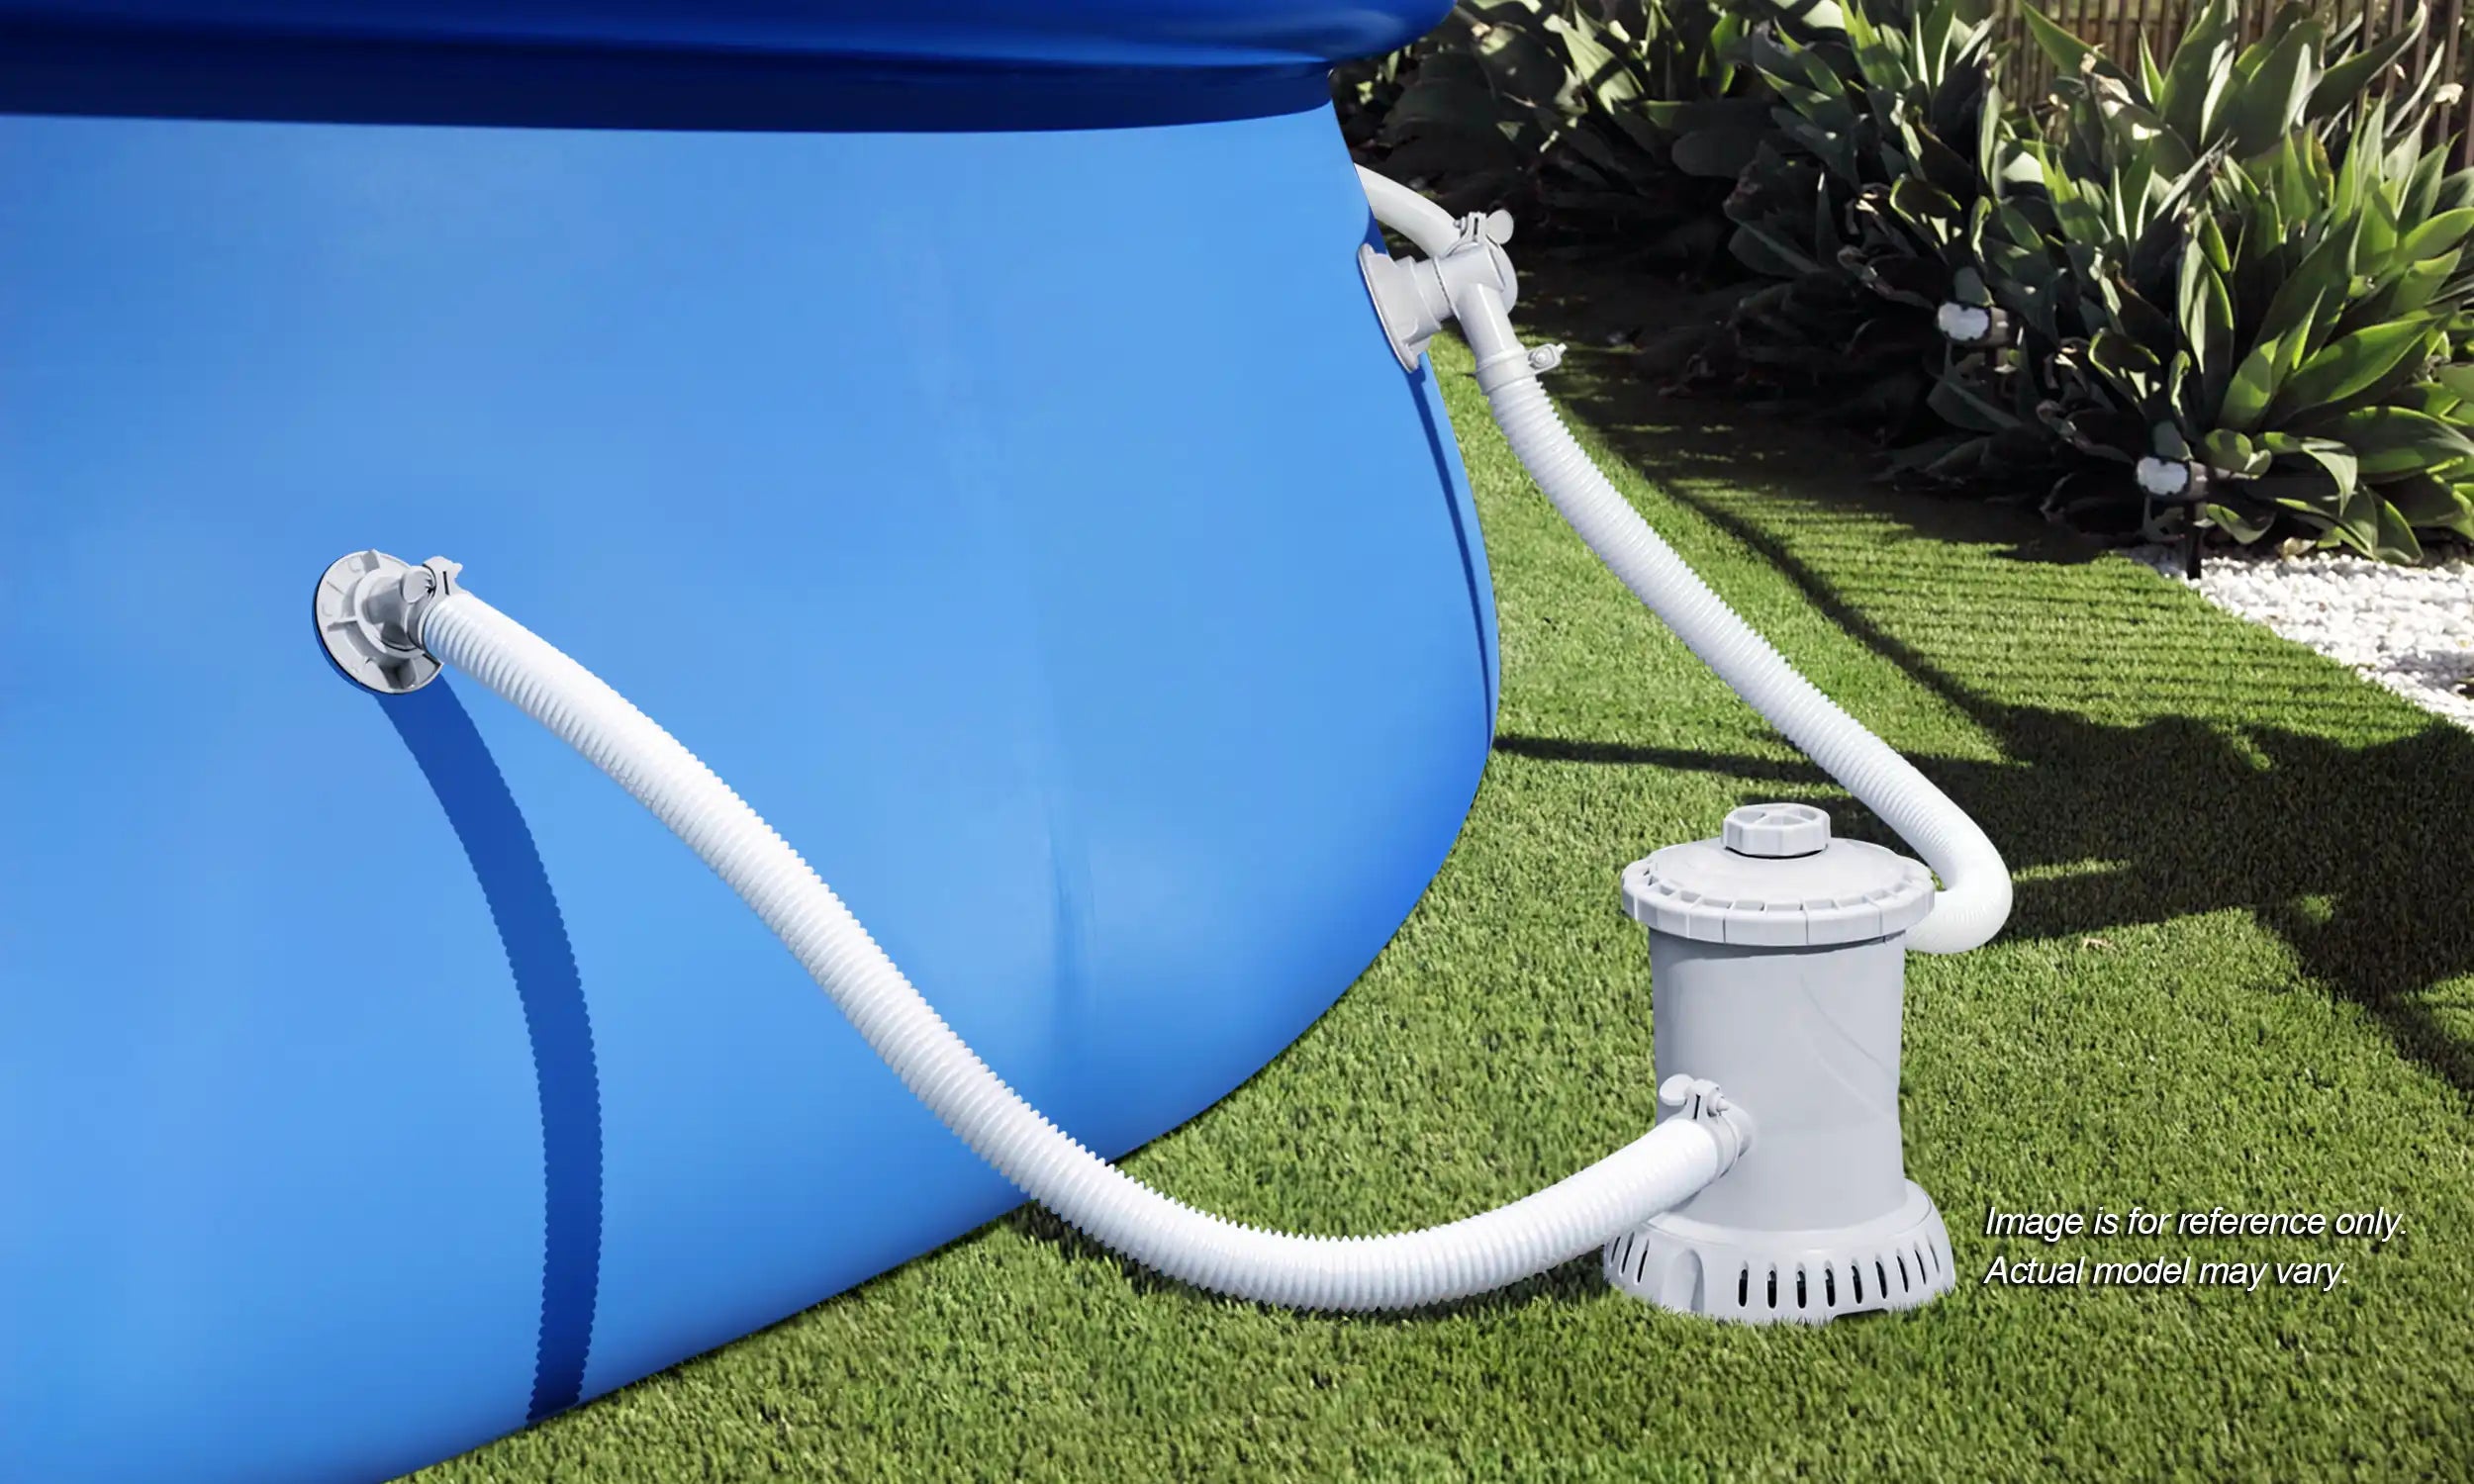 Funsicle RX600 Cartridge Filter Pump attached to a pool on a grass field